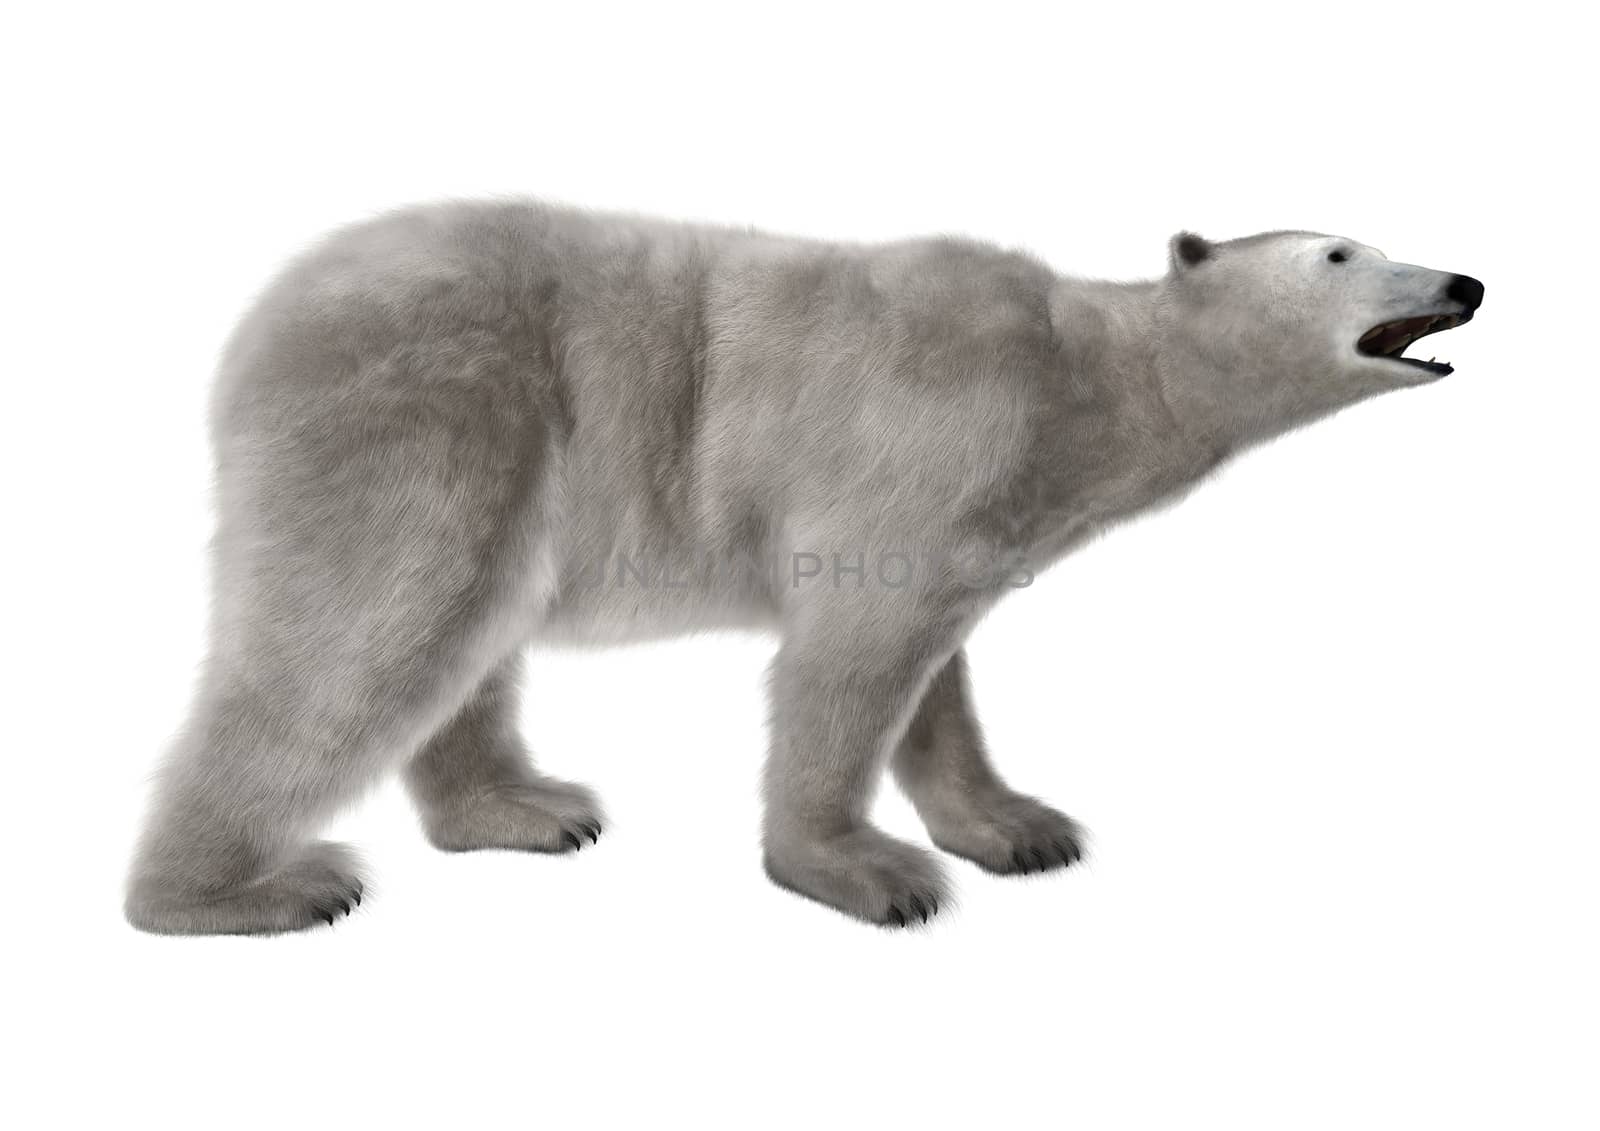 3D digital render of a polar bear isolated on white background